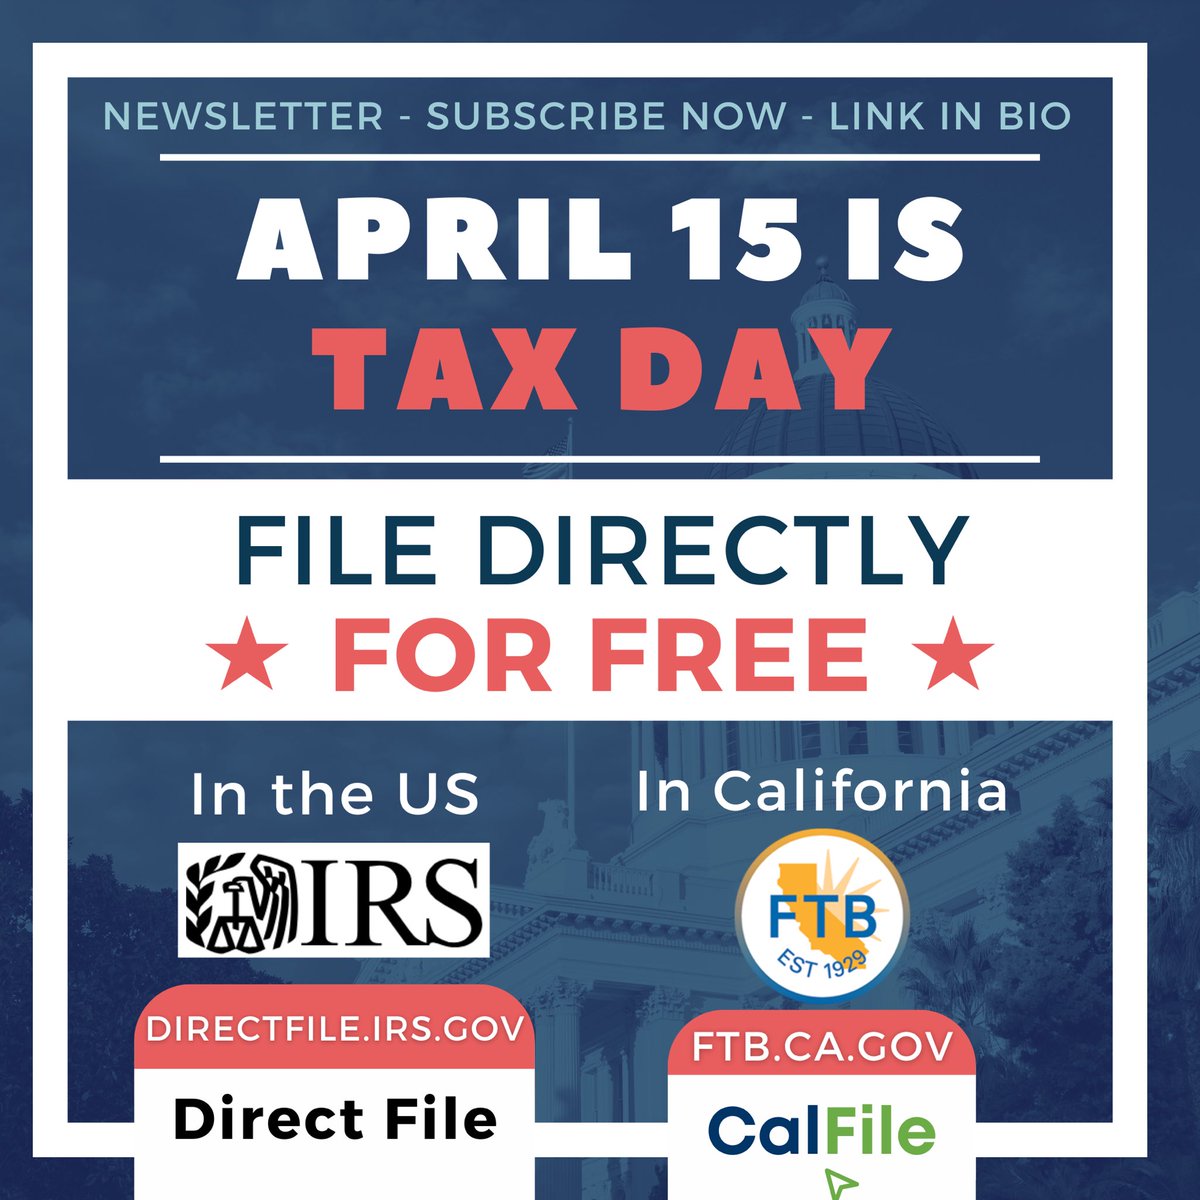 Tax Day is April 15! Thanks to nation-wide community advocacy and the Inflation Reduction Act, many California residents can now file taxes for free directly with the @irsnews and @calftb. Follow the links above to see if you qualify for the new direct file services!